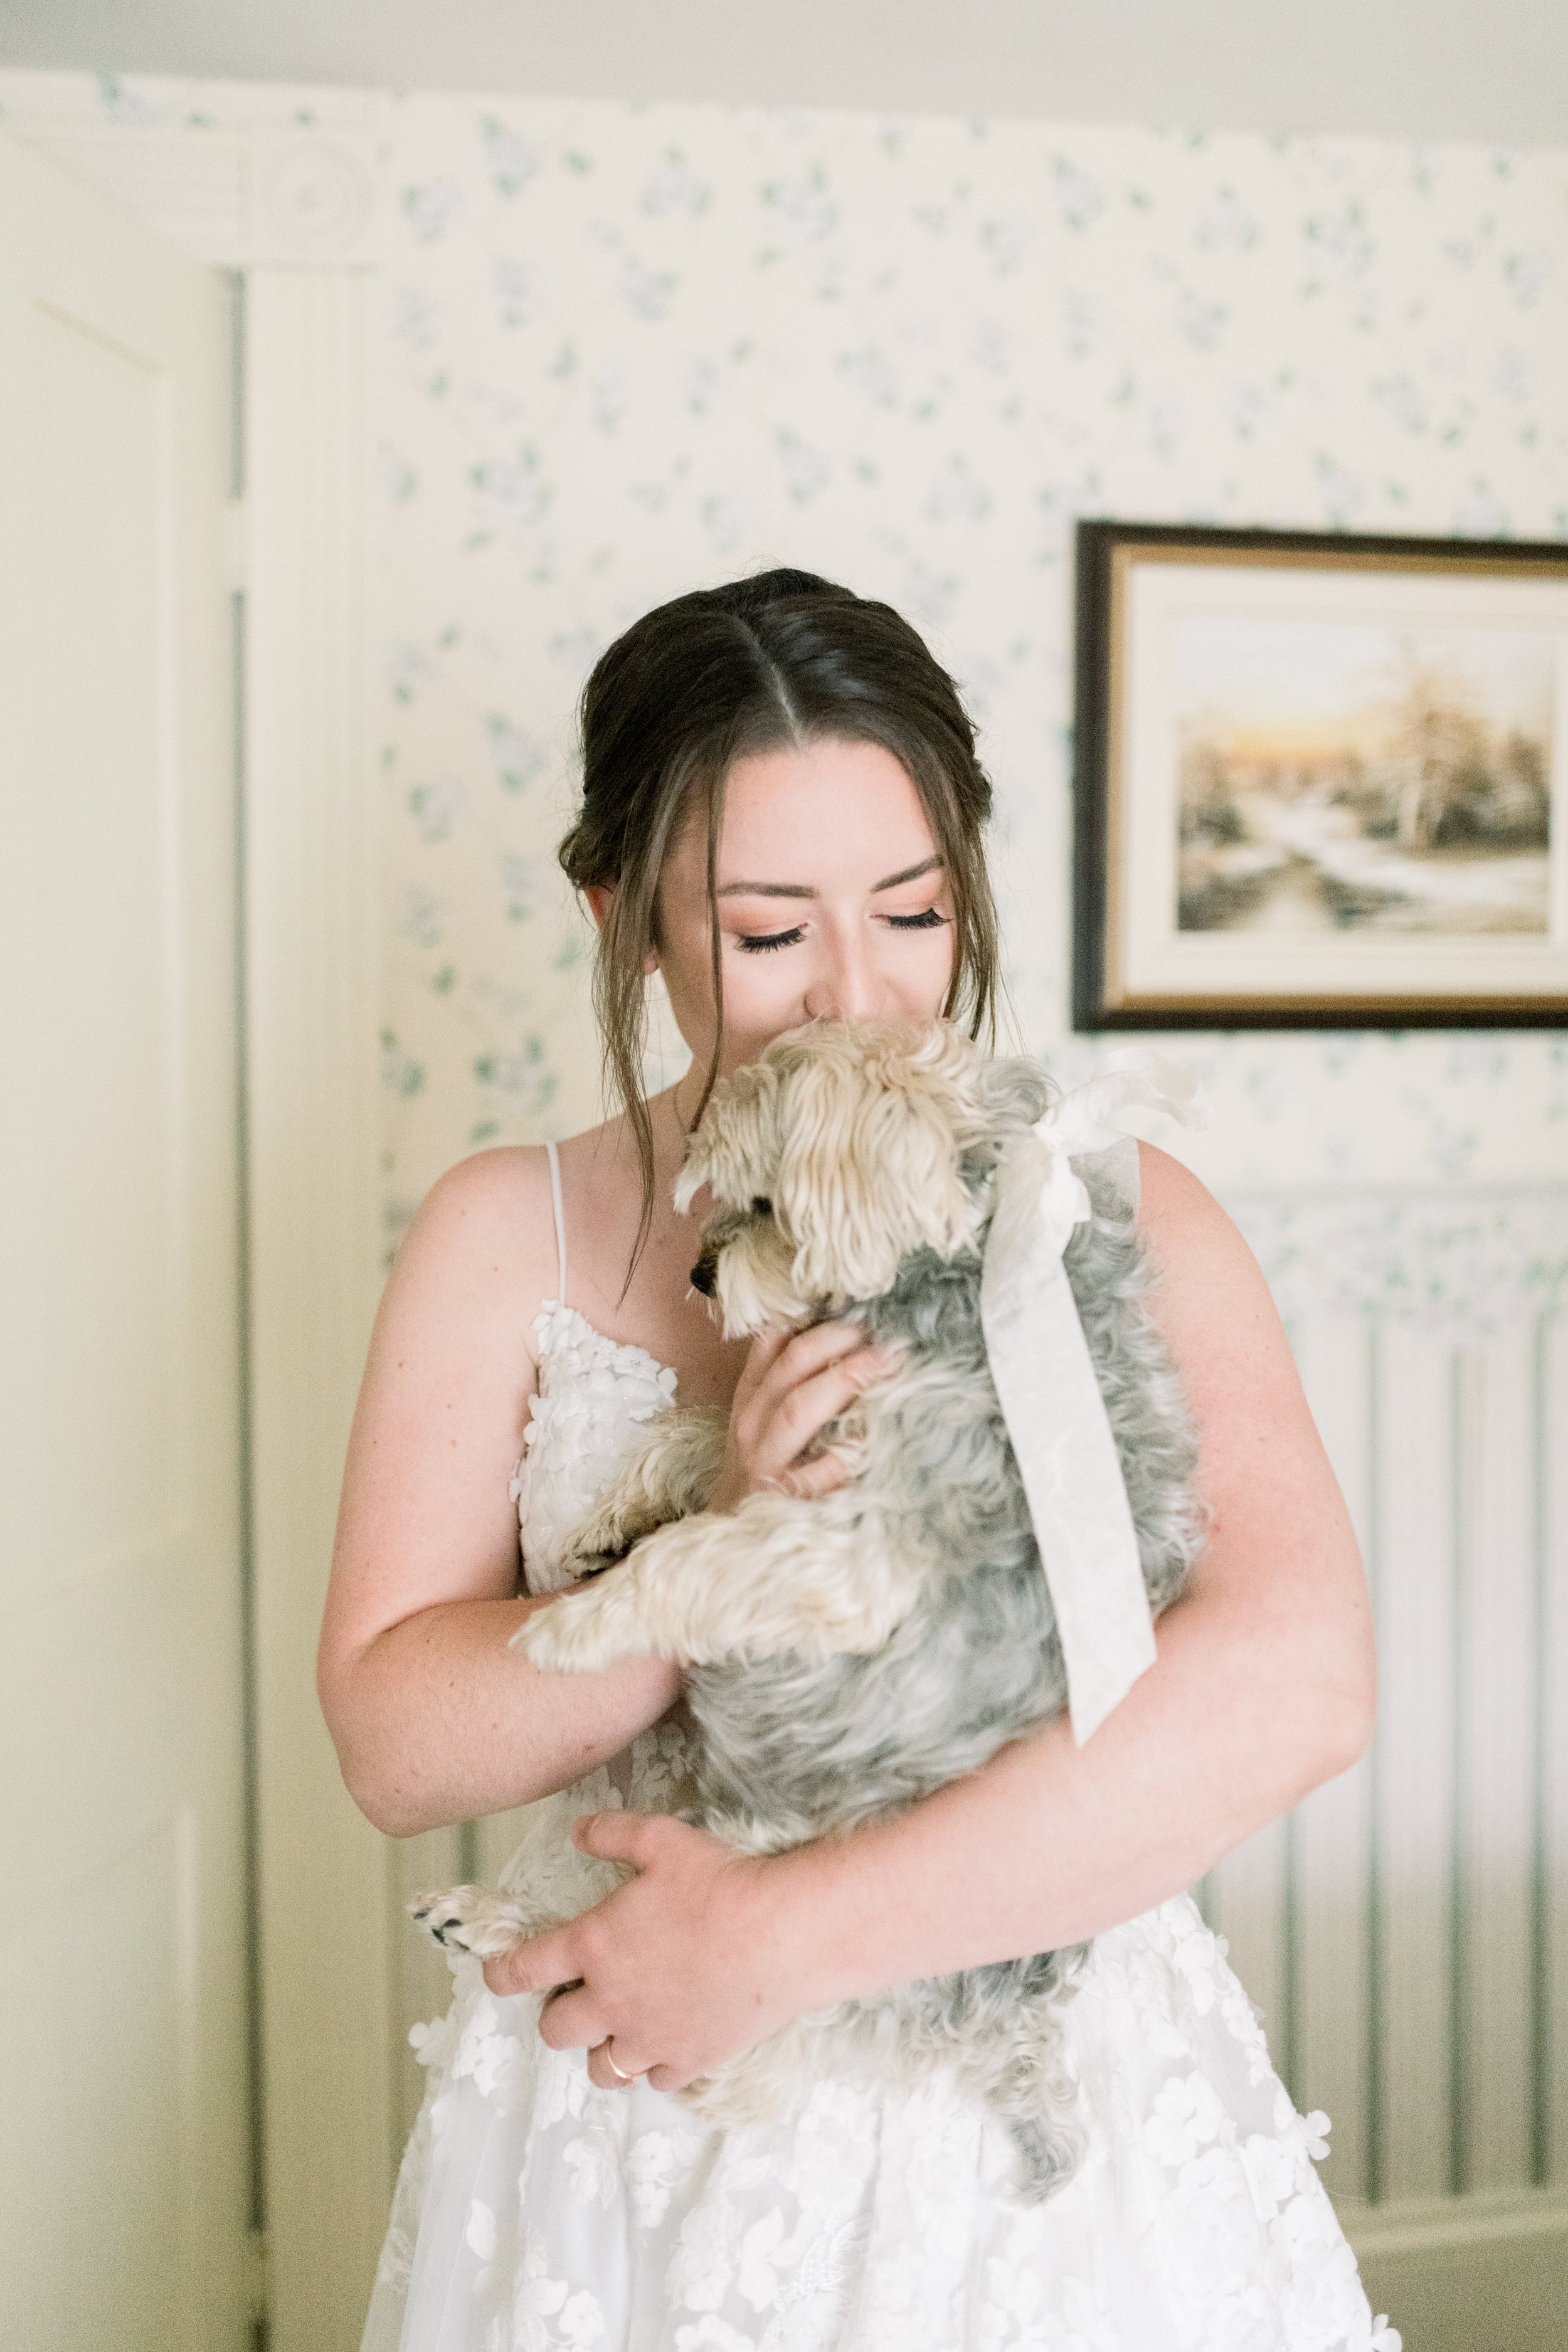  In Boulter, Ontario a bride kisses her little dog by Chelsea Mason Photography. Professional wedding Ontario wedding photographer #chelseamasonphotography #chelseamasonweddings #Ontarioweddings #Boulterweddingphotographer #laceweddinggown 